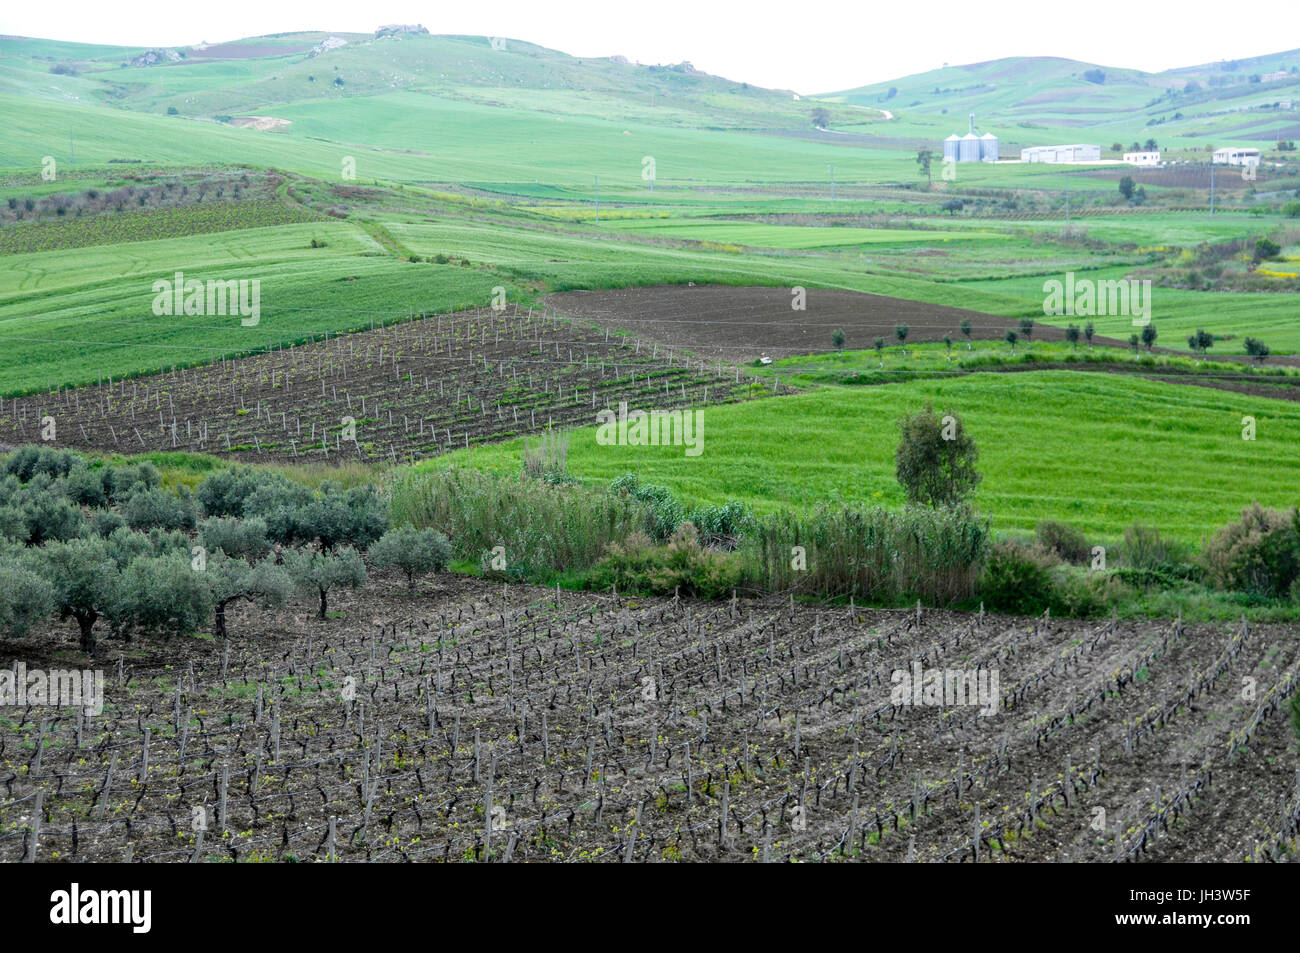 Fields of vineyards and green pasture in rural Sicily, Italy. Stock Photo